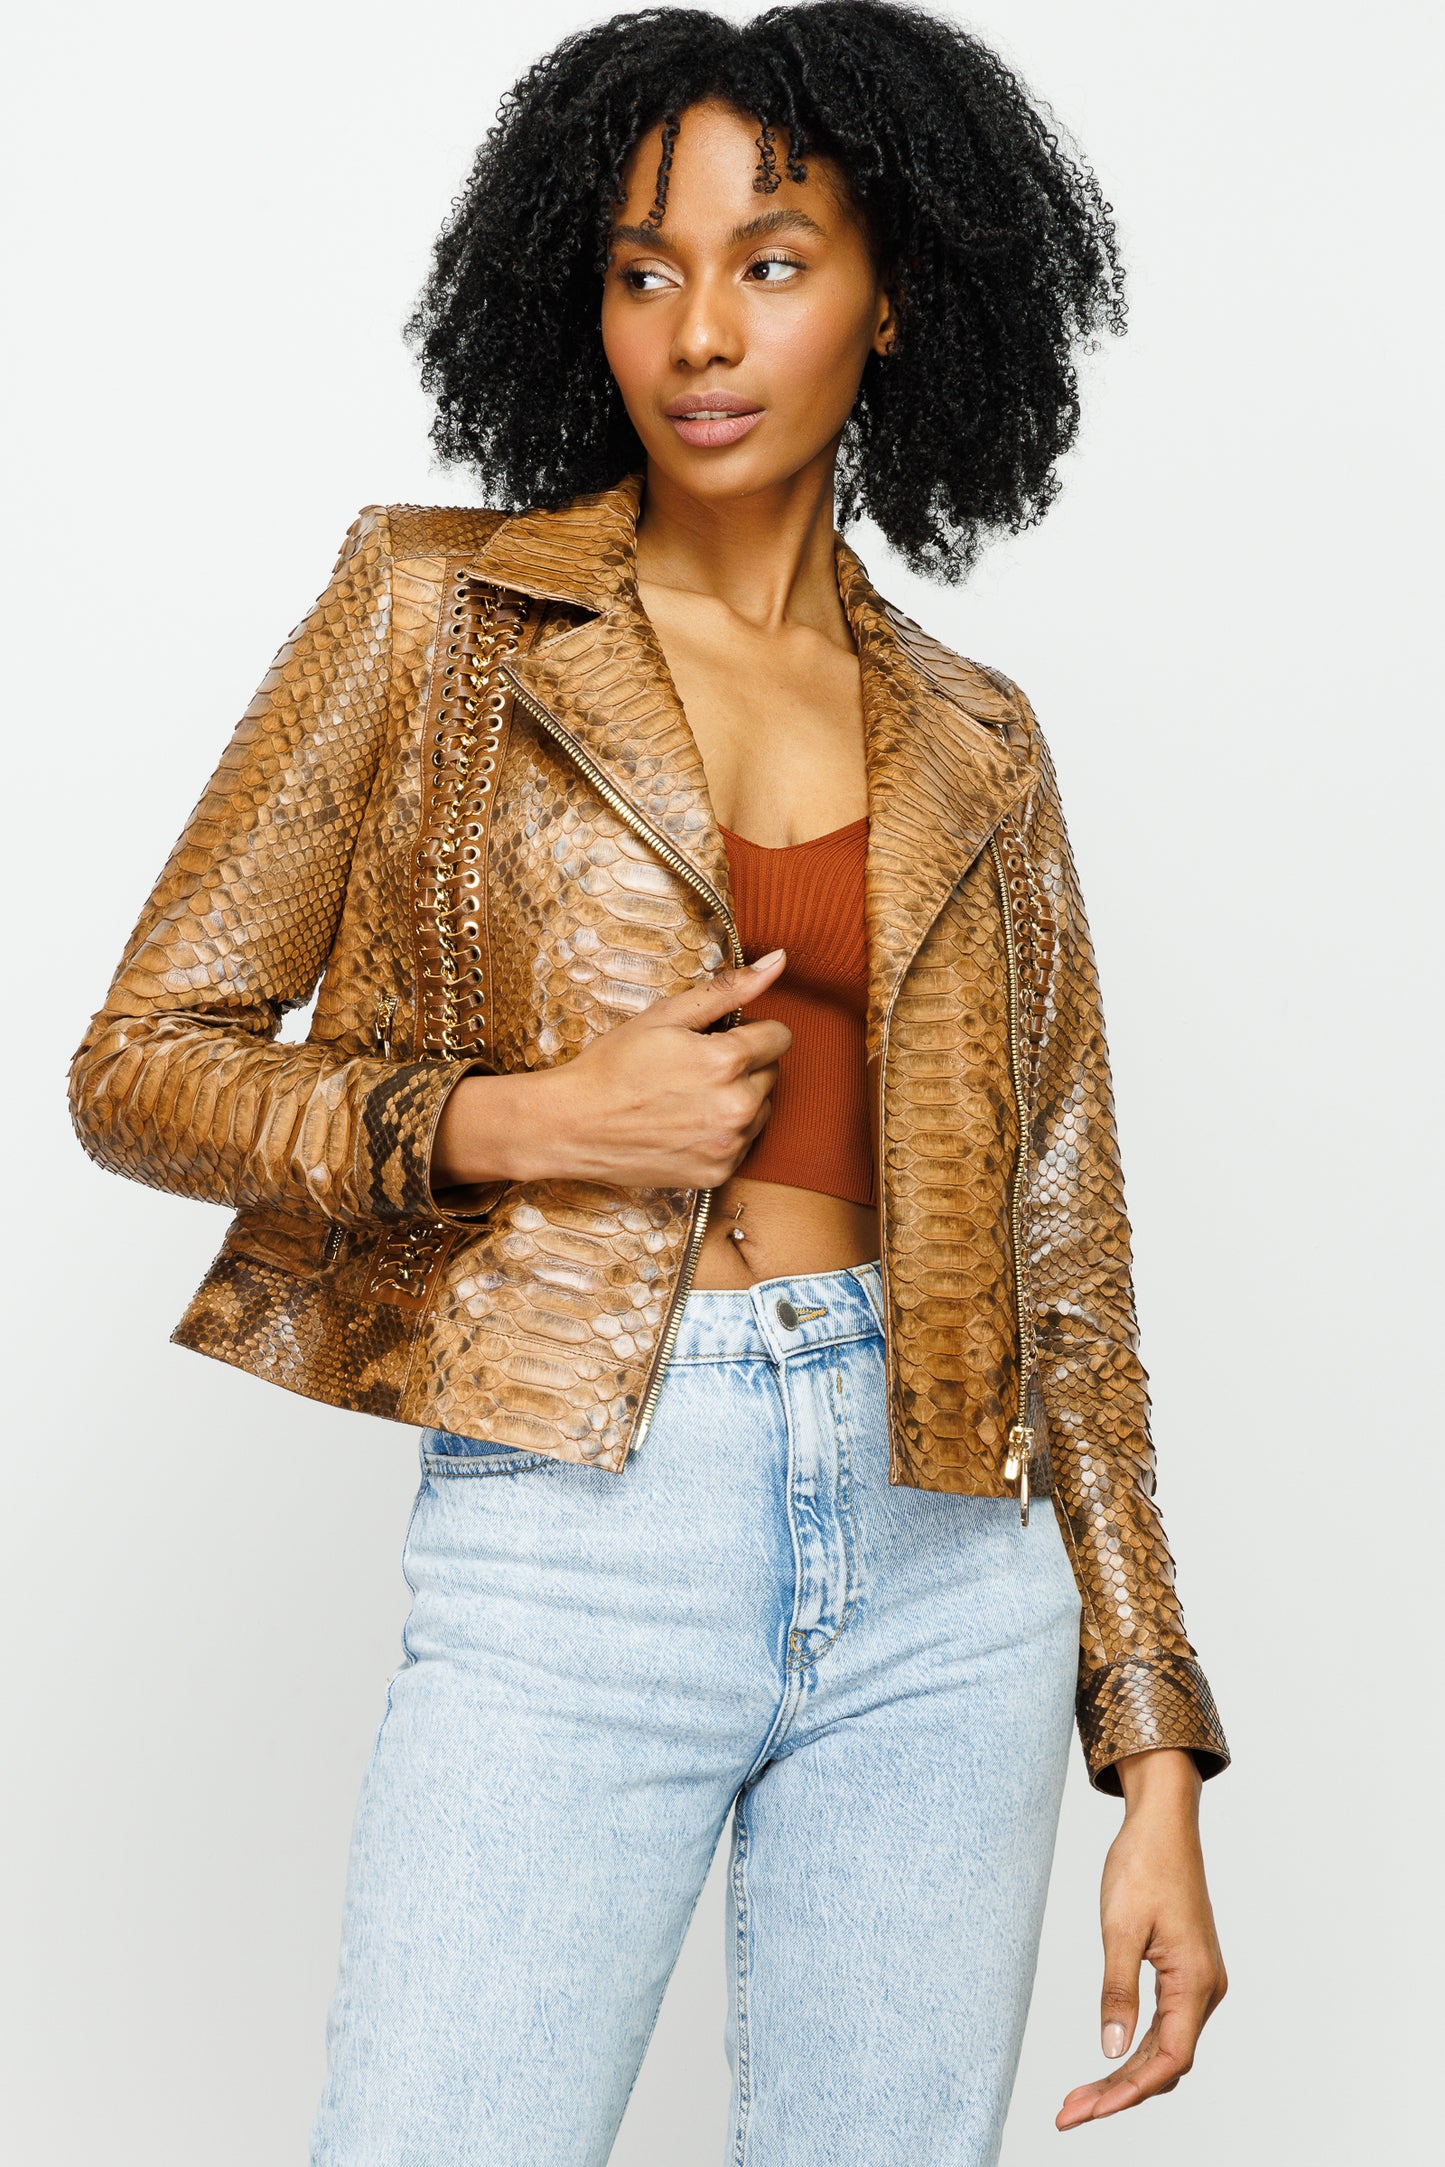 The Nayro Pythn Tan Leather Jacket